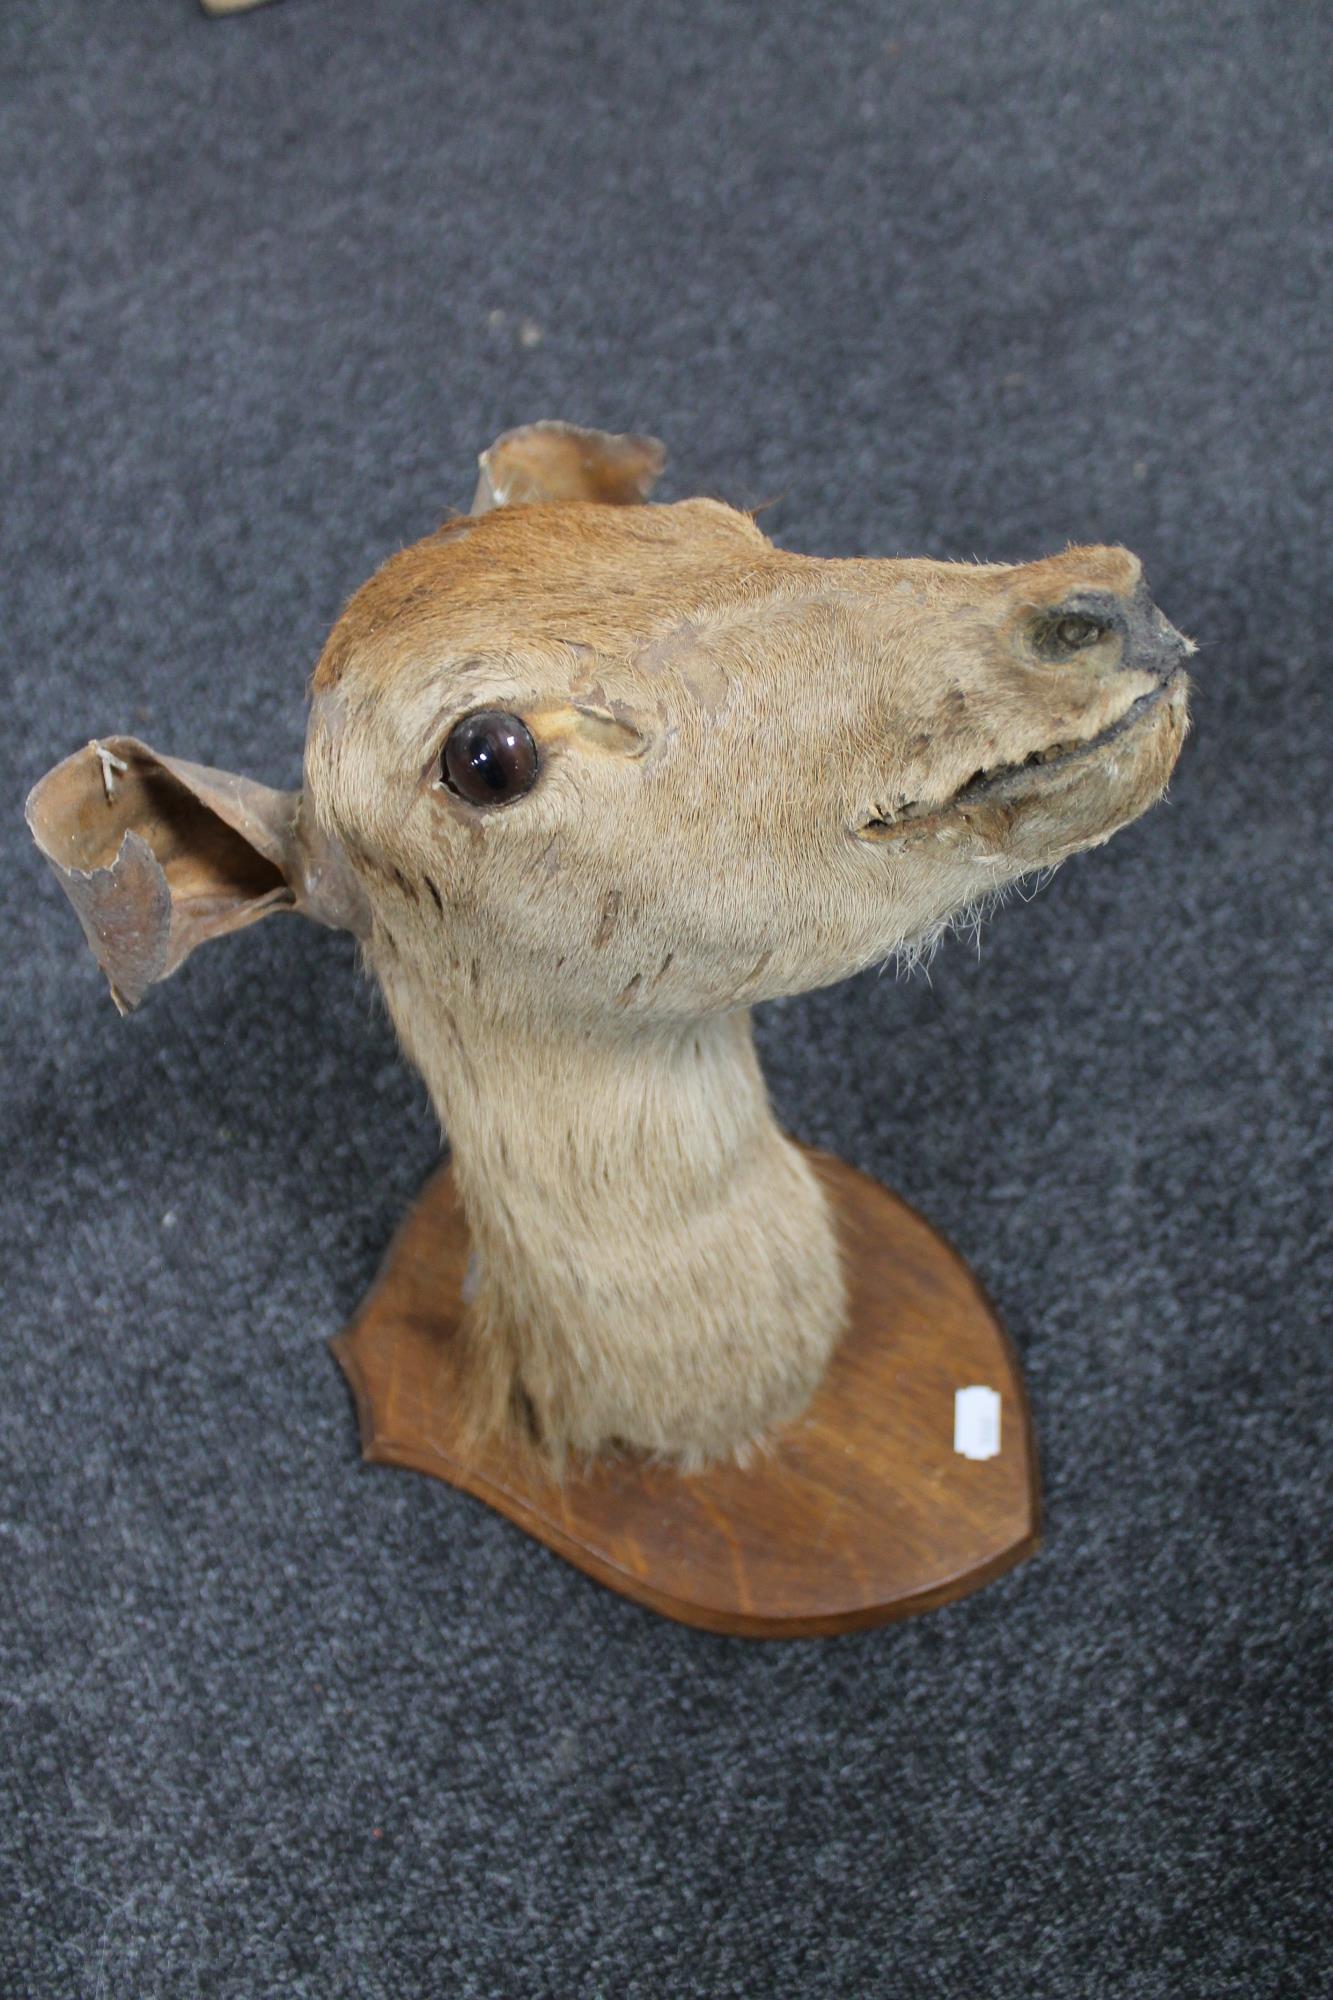 A taxidermy deer head mounted on a shield